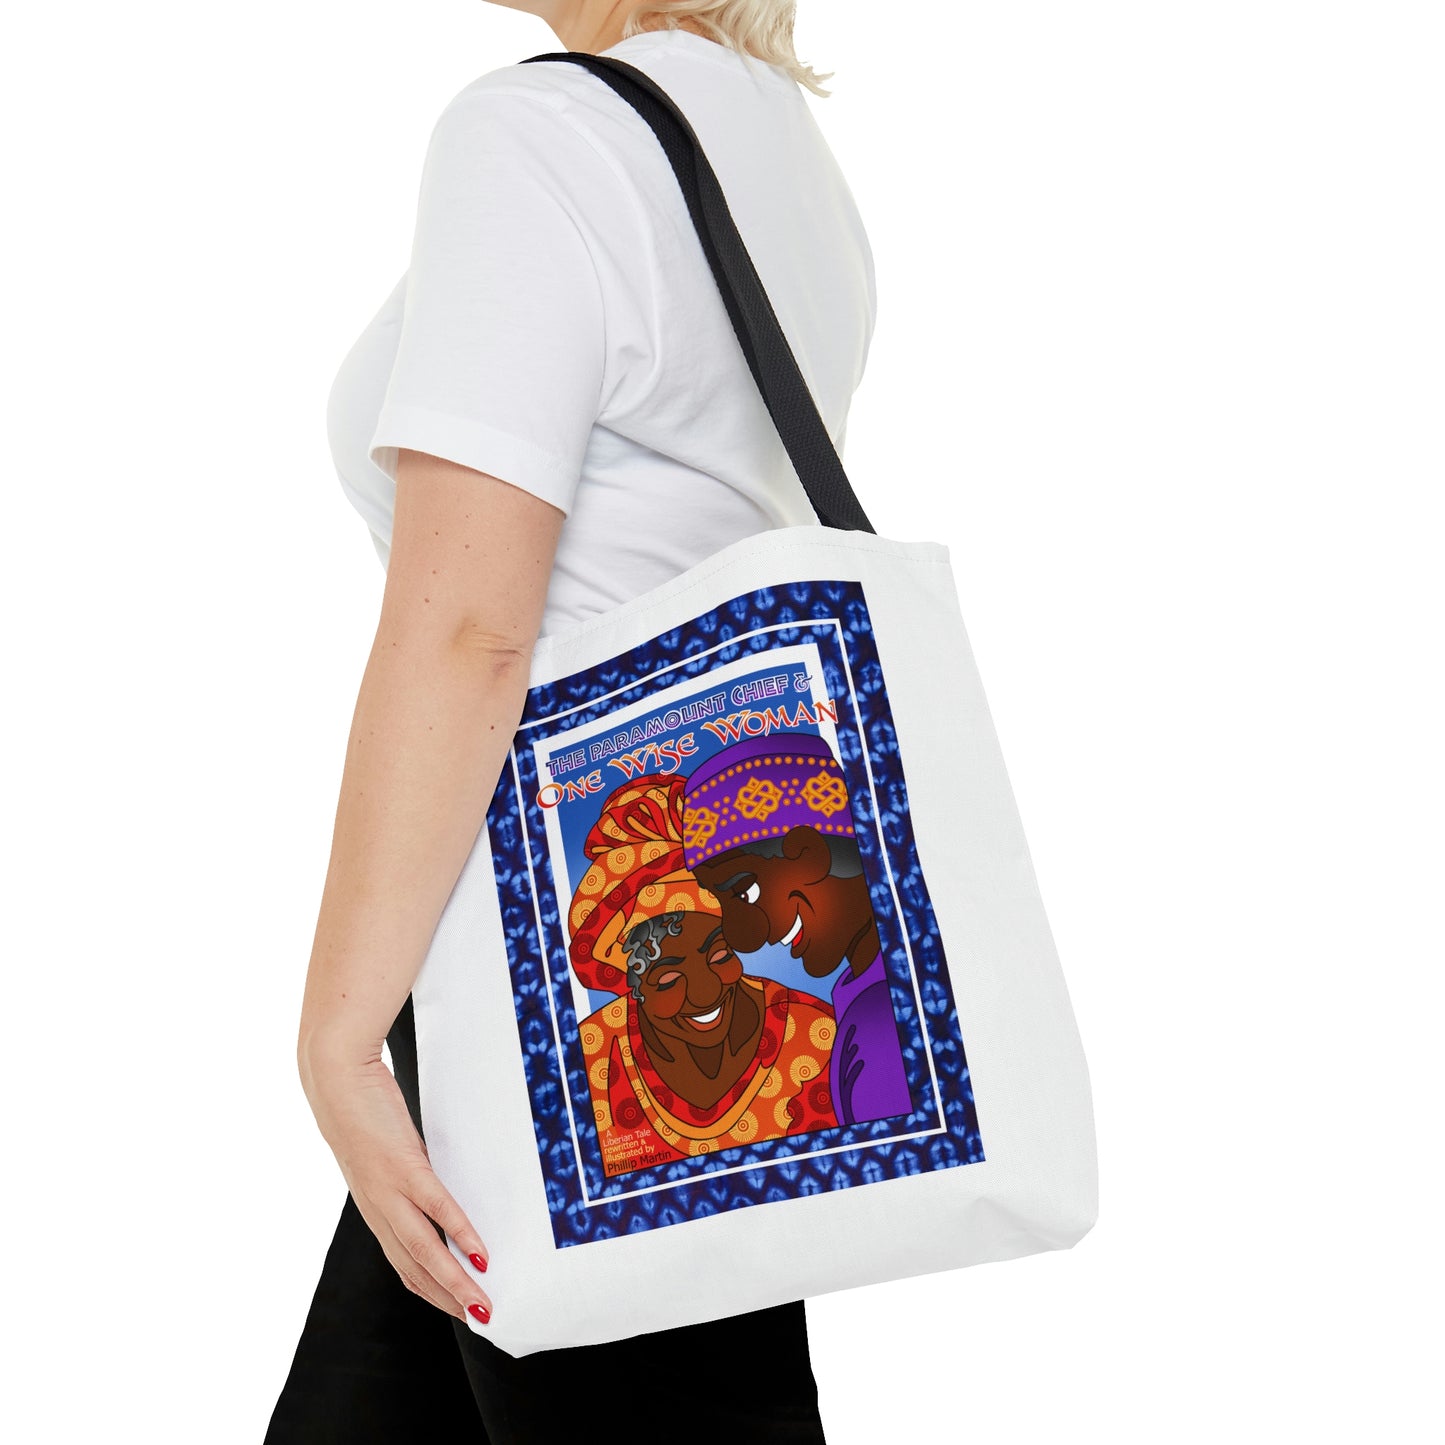 The Paramount Chief and One Wise Woman AOP Tote Bag